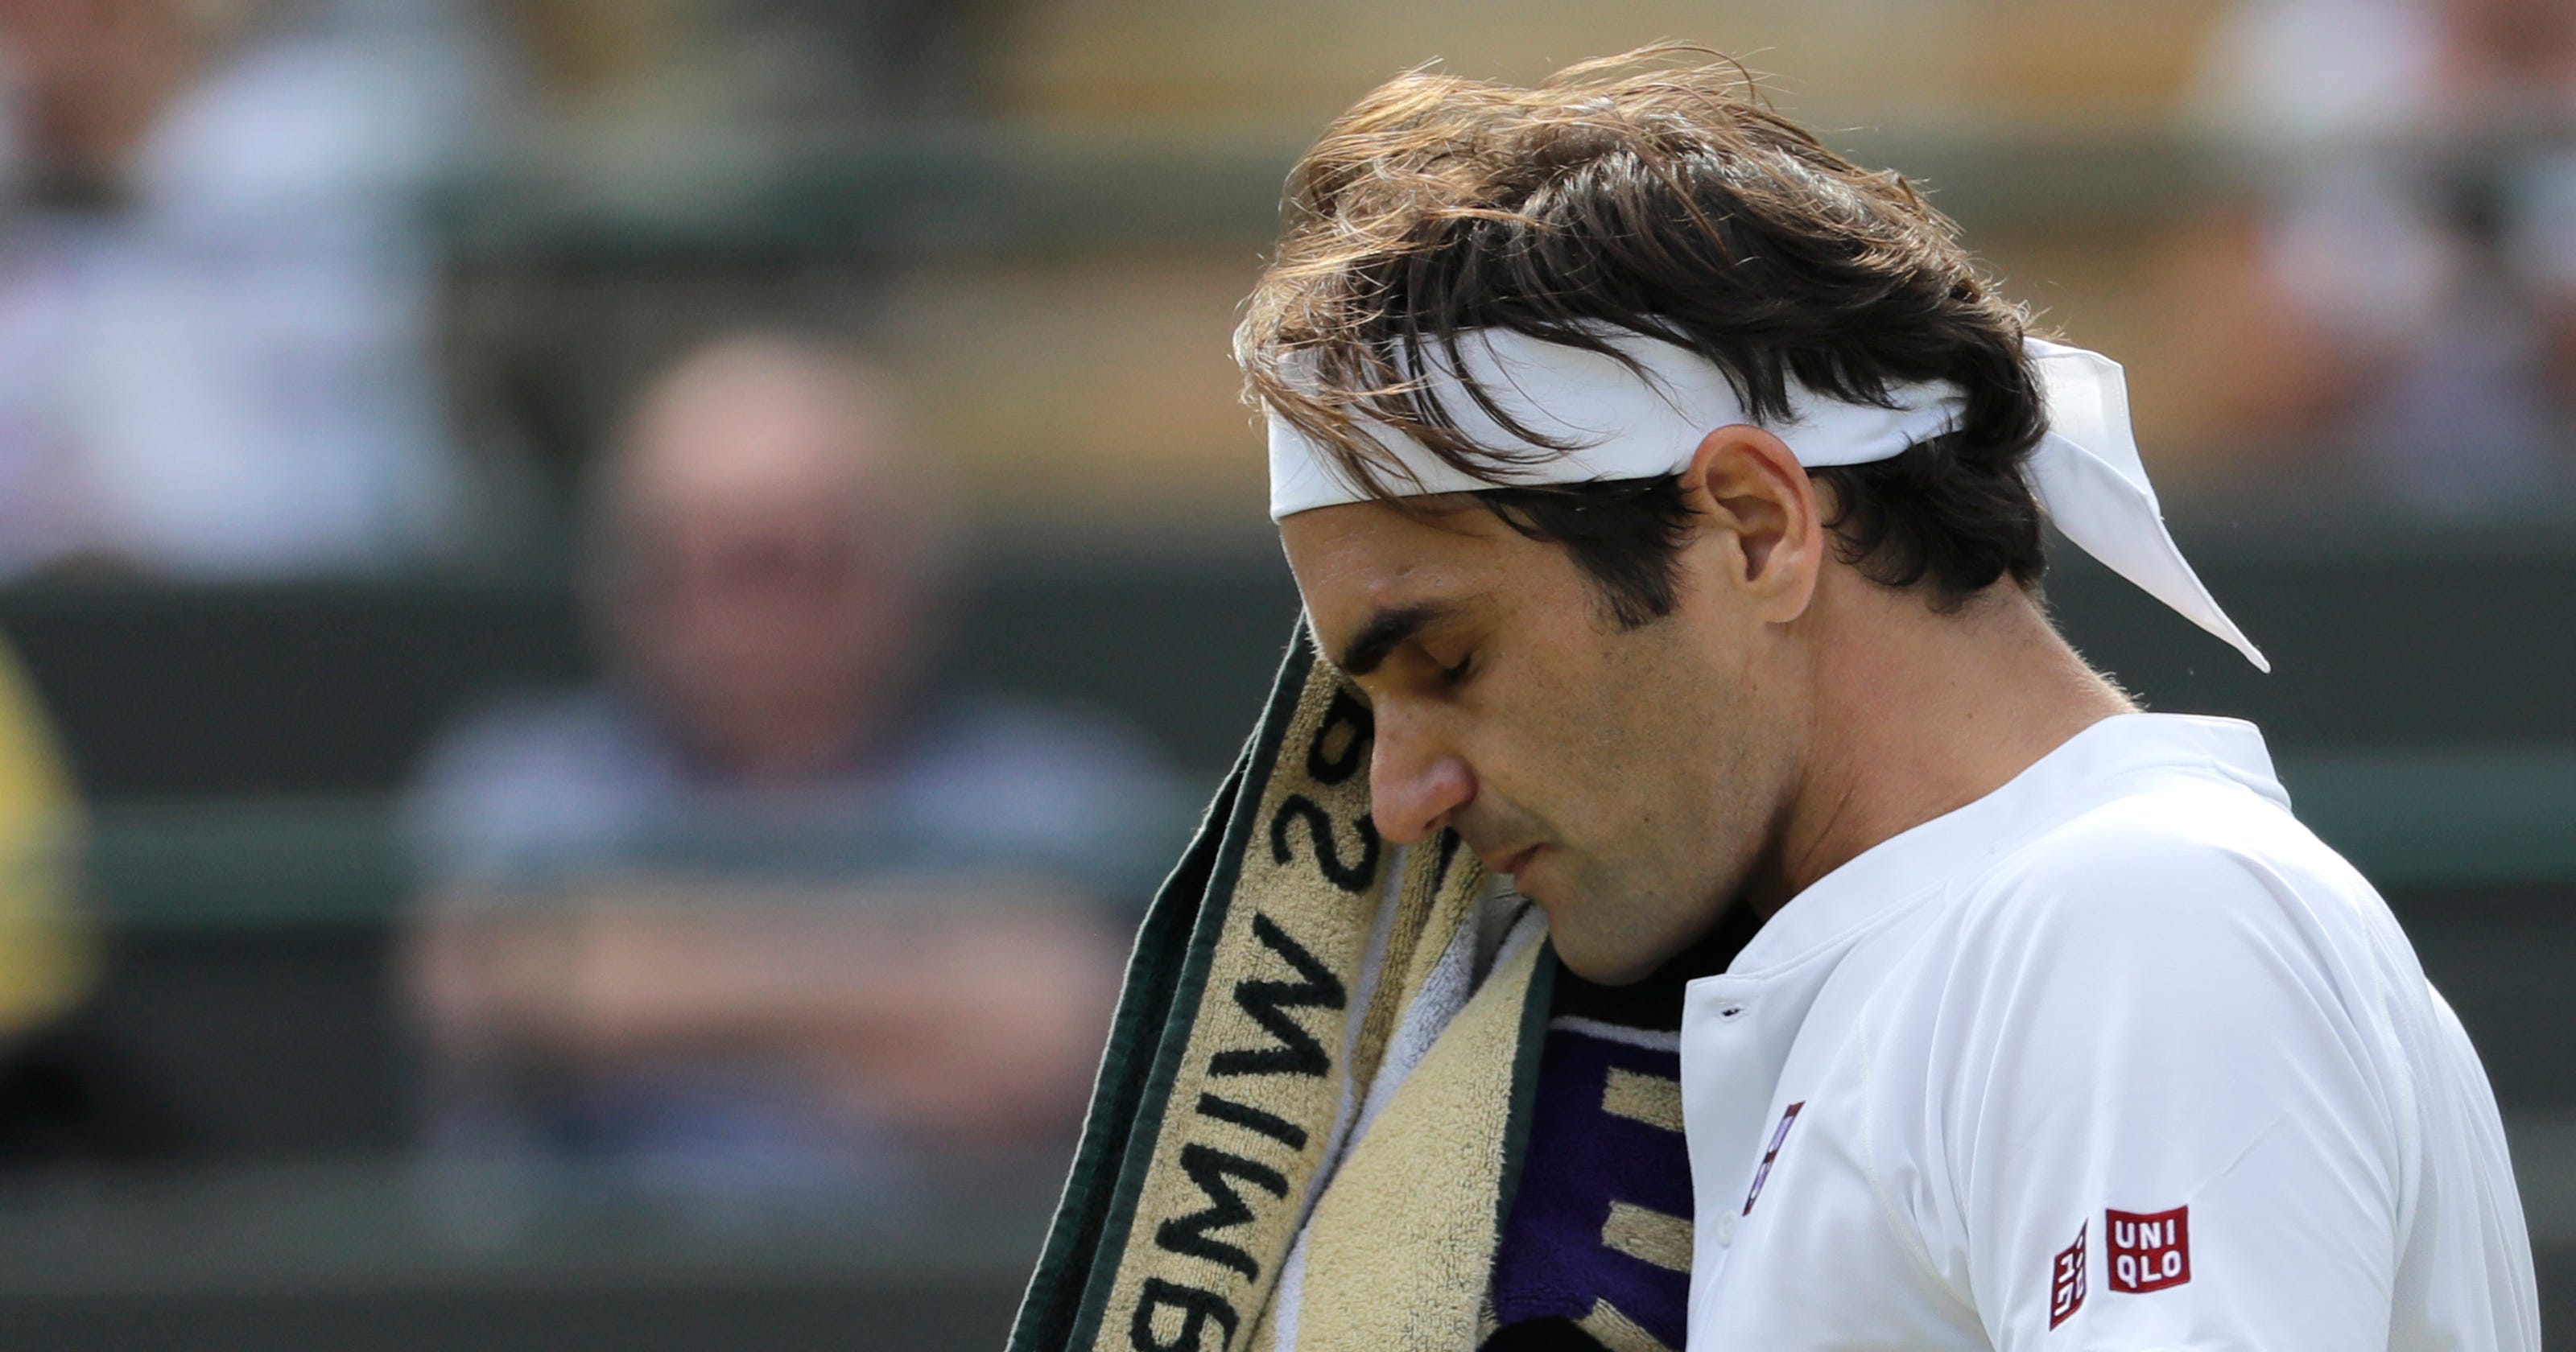 Wimbledon: Roger Federer is upset by Kevin Anderson in quarterfinals3200 x 1680